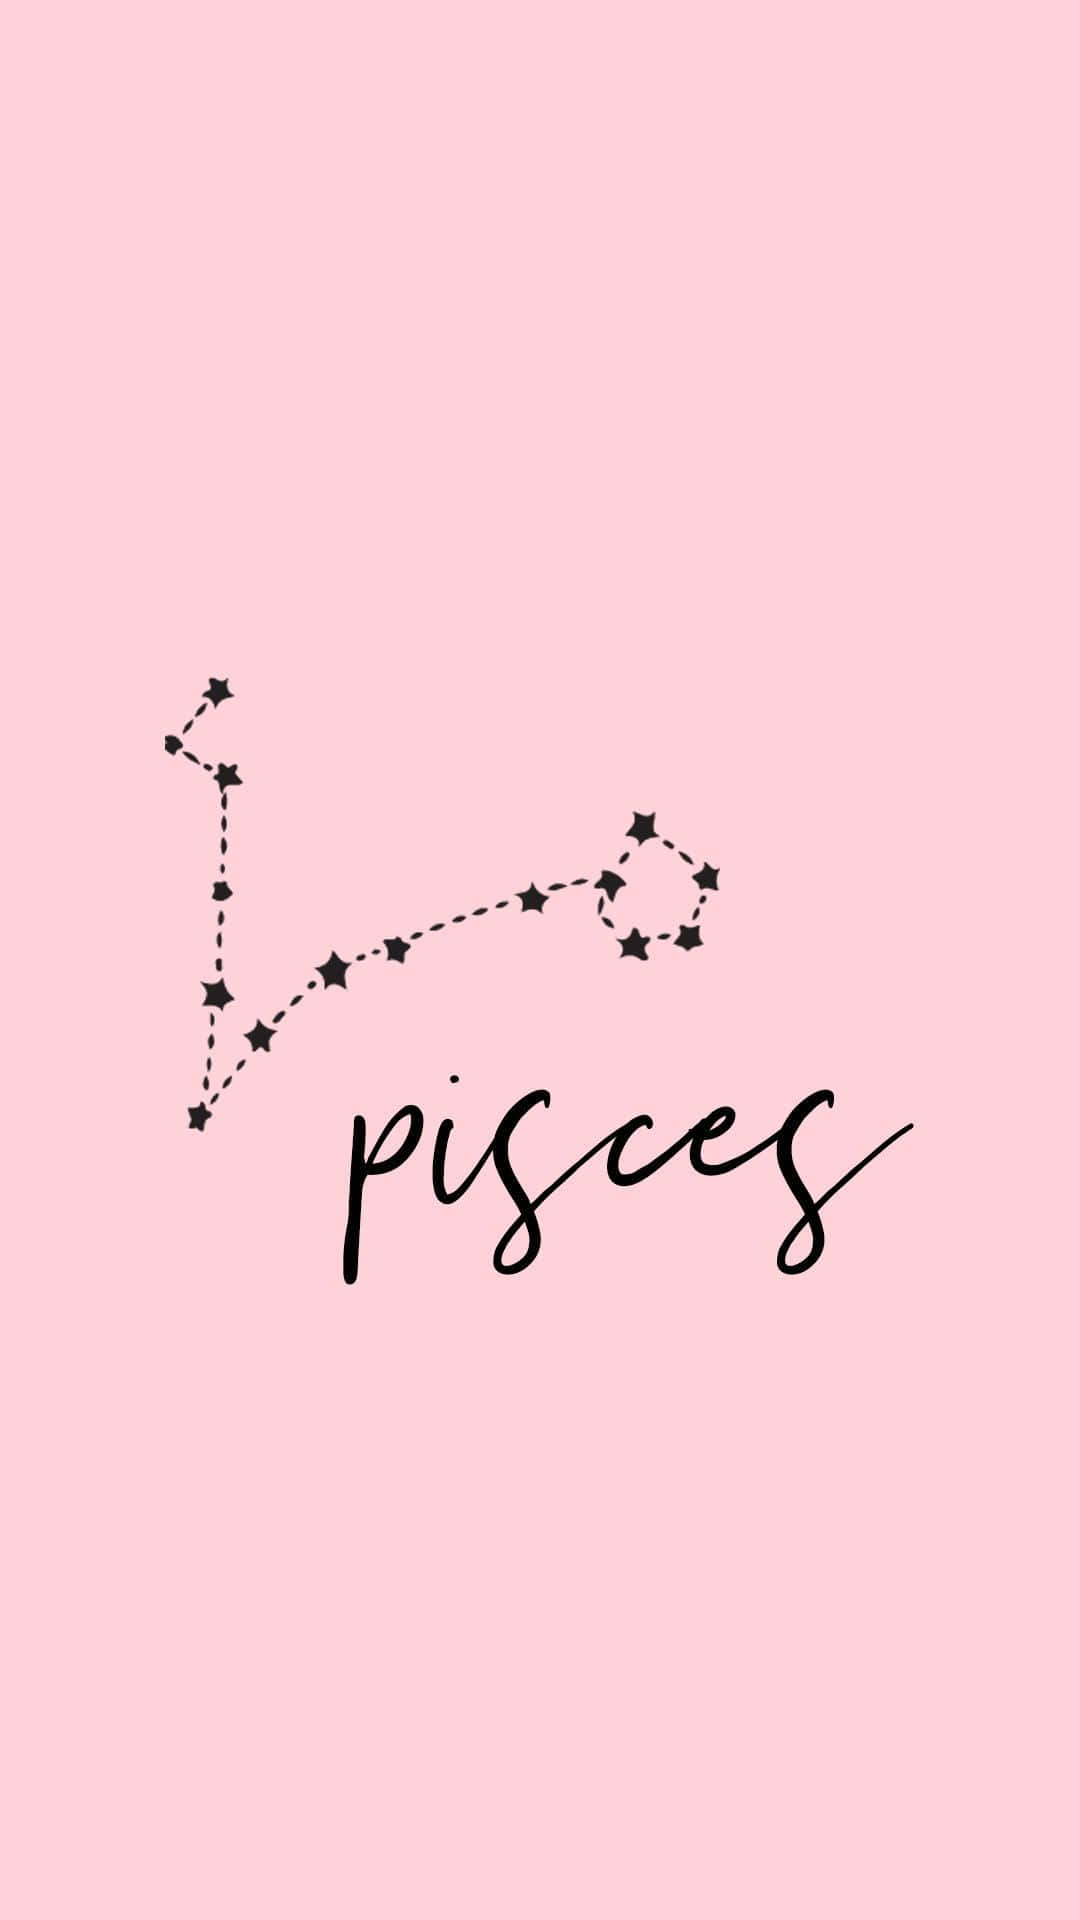 Pisces Zodiac Sign On A Pink Background